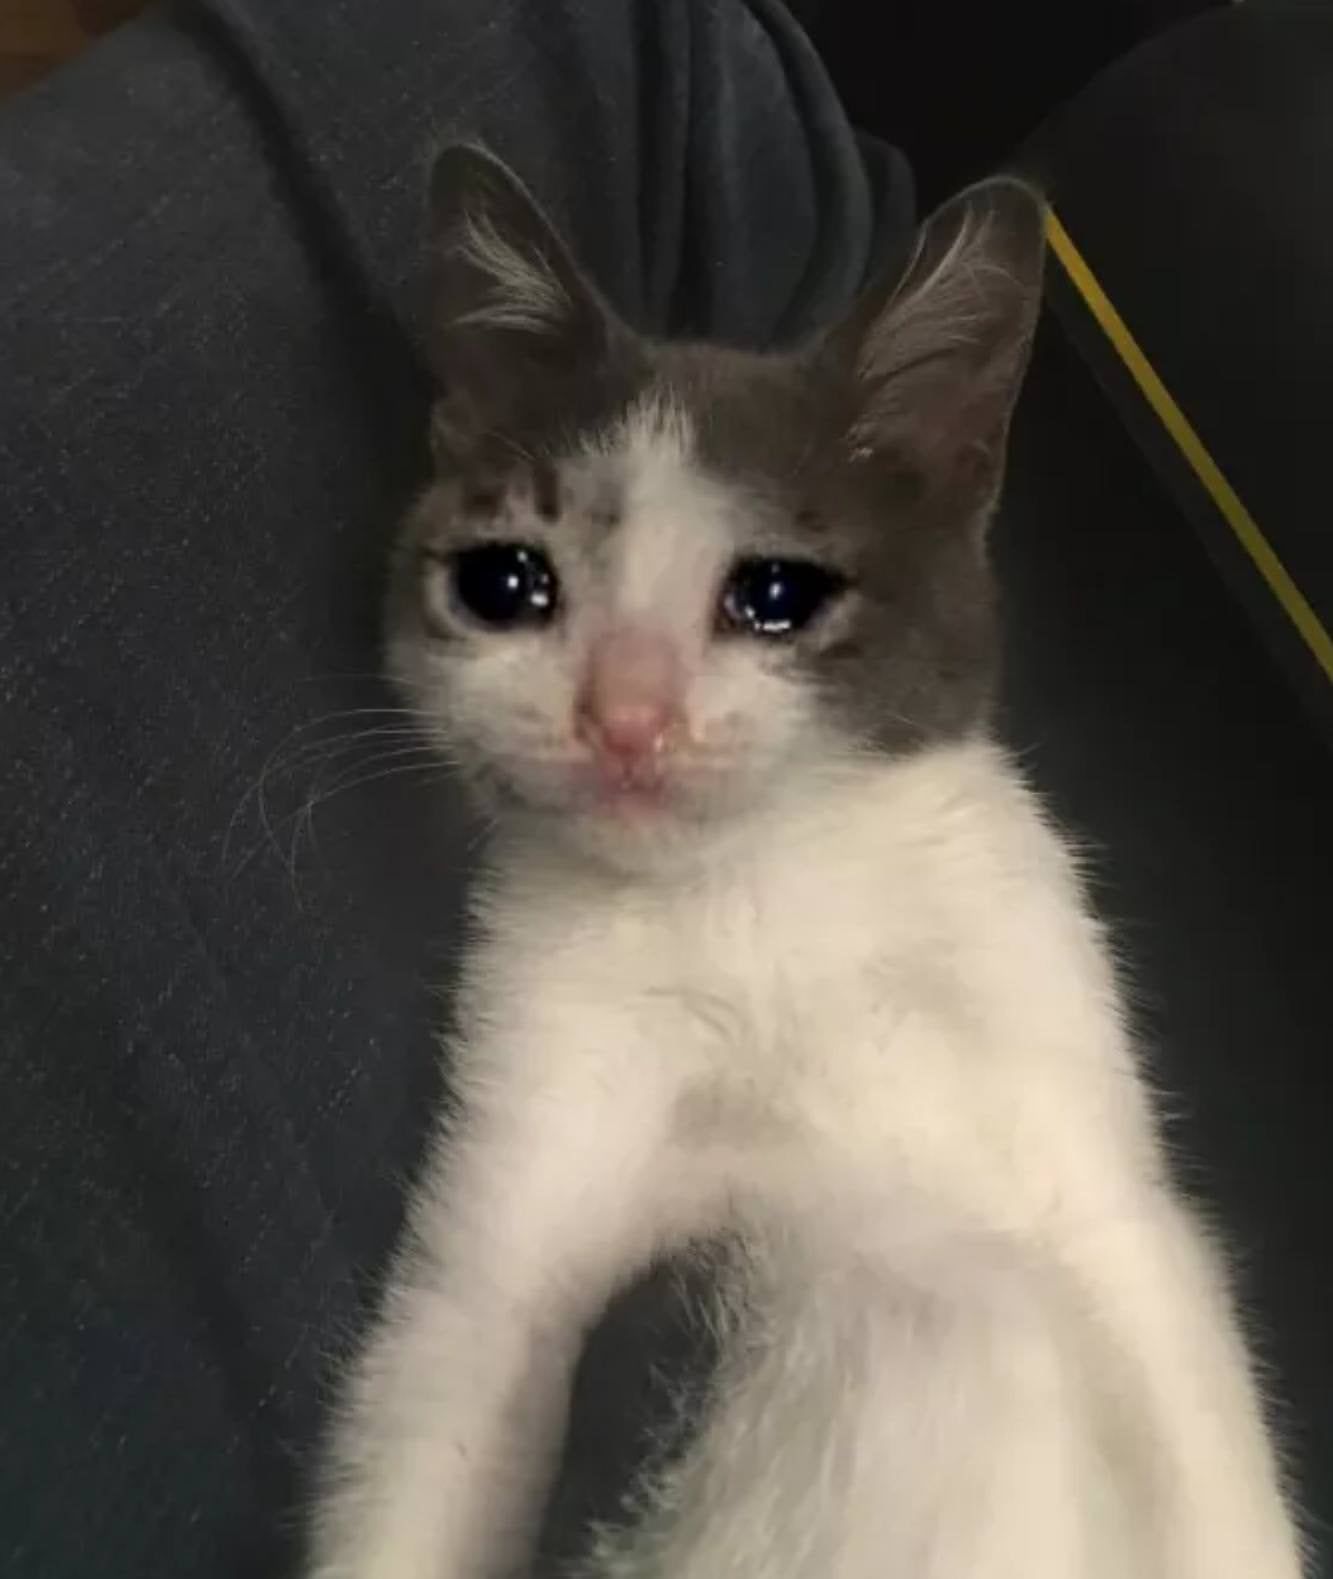 What's the origin of the crying cat picture, and why am I seeing them all over now?